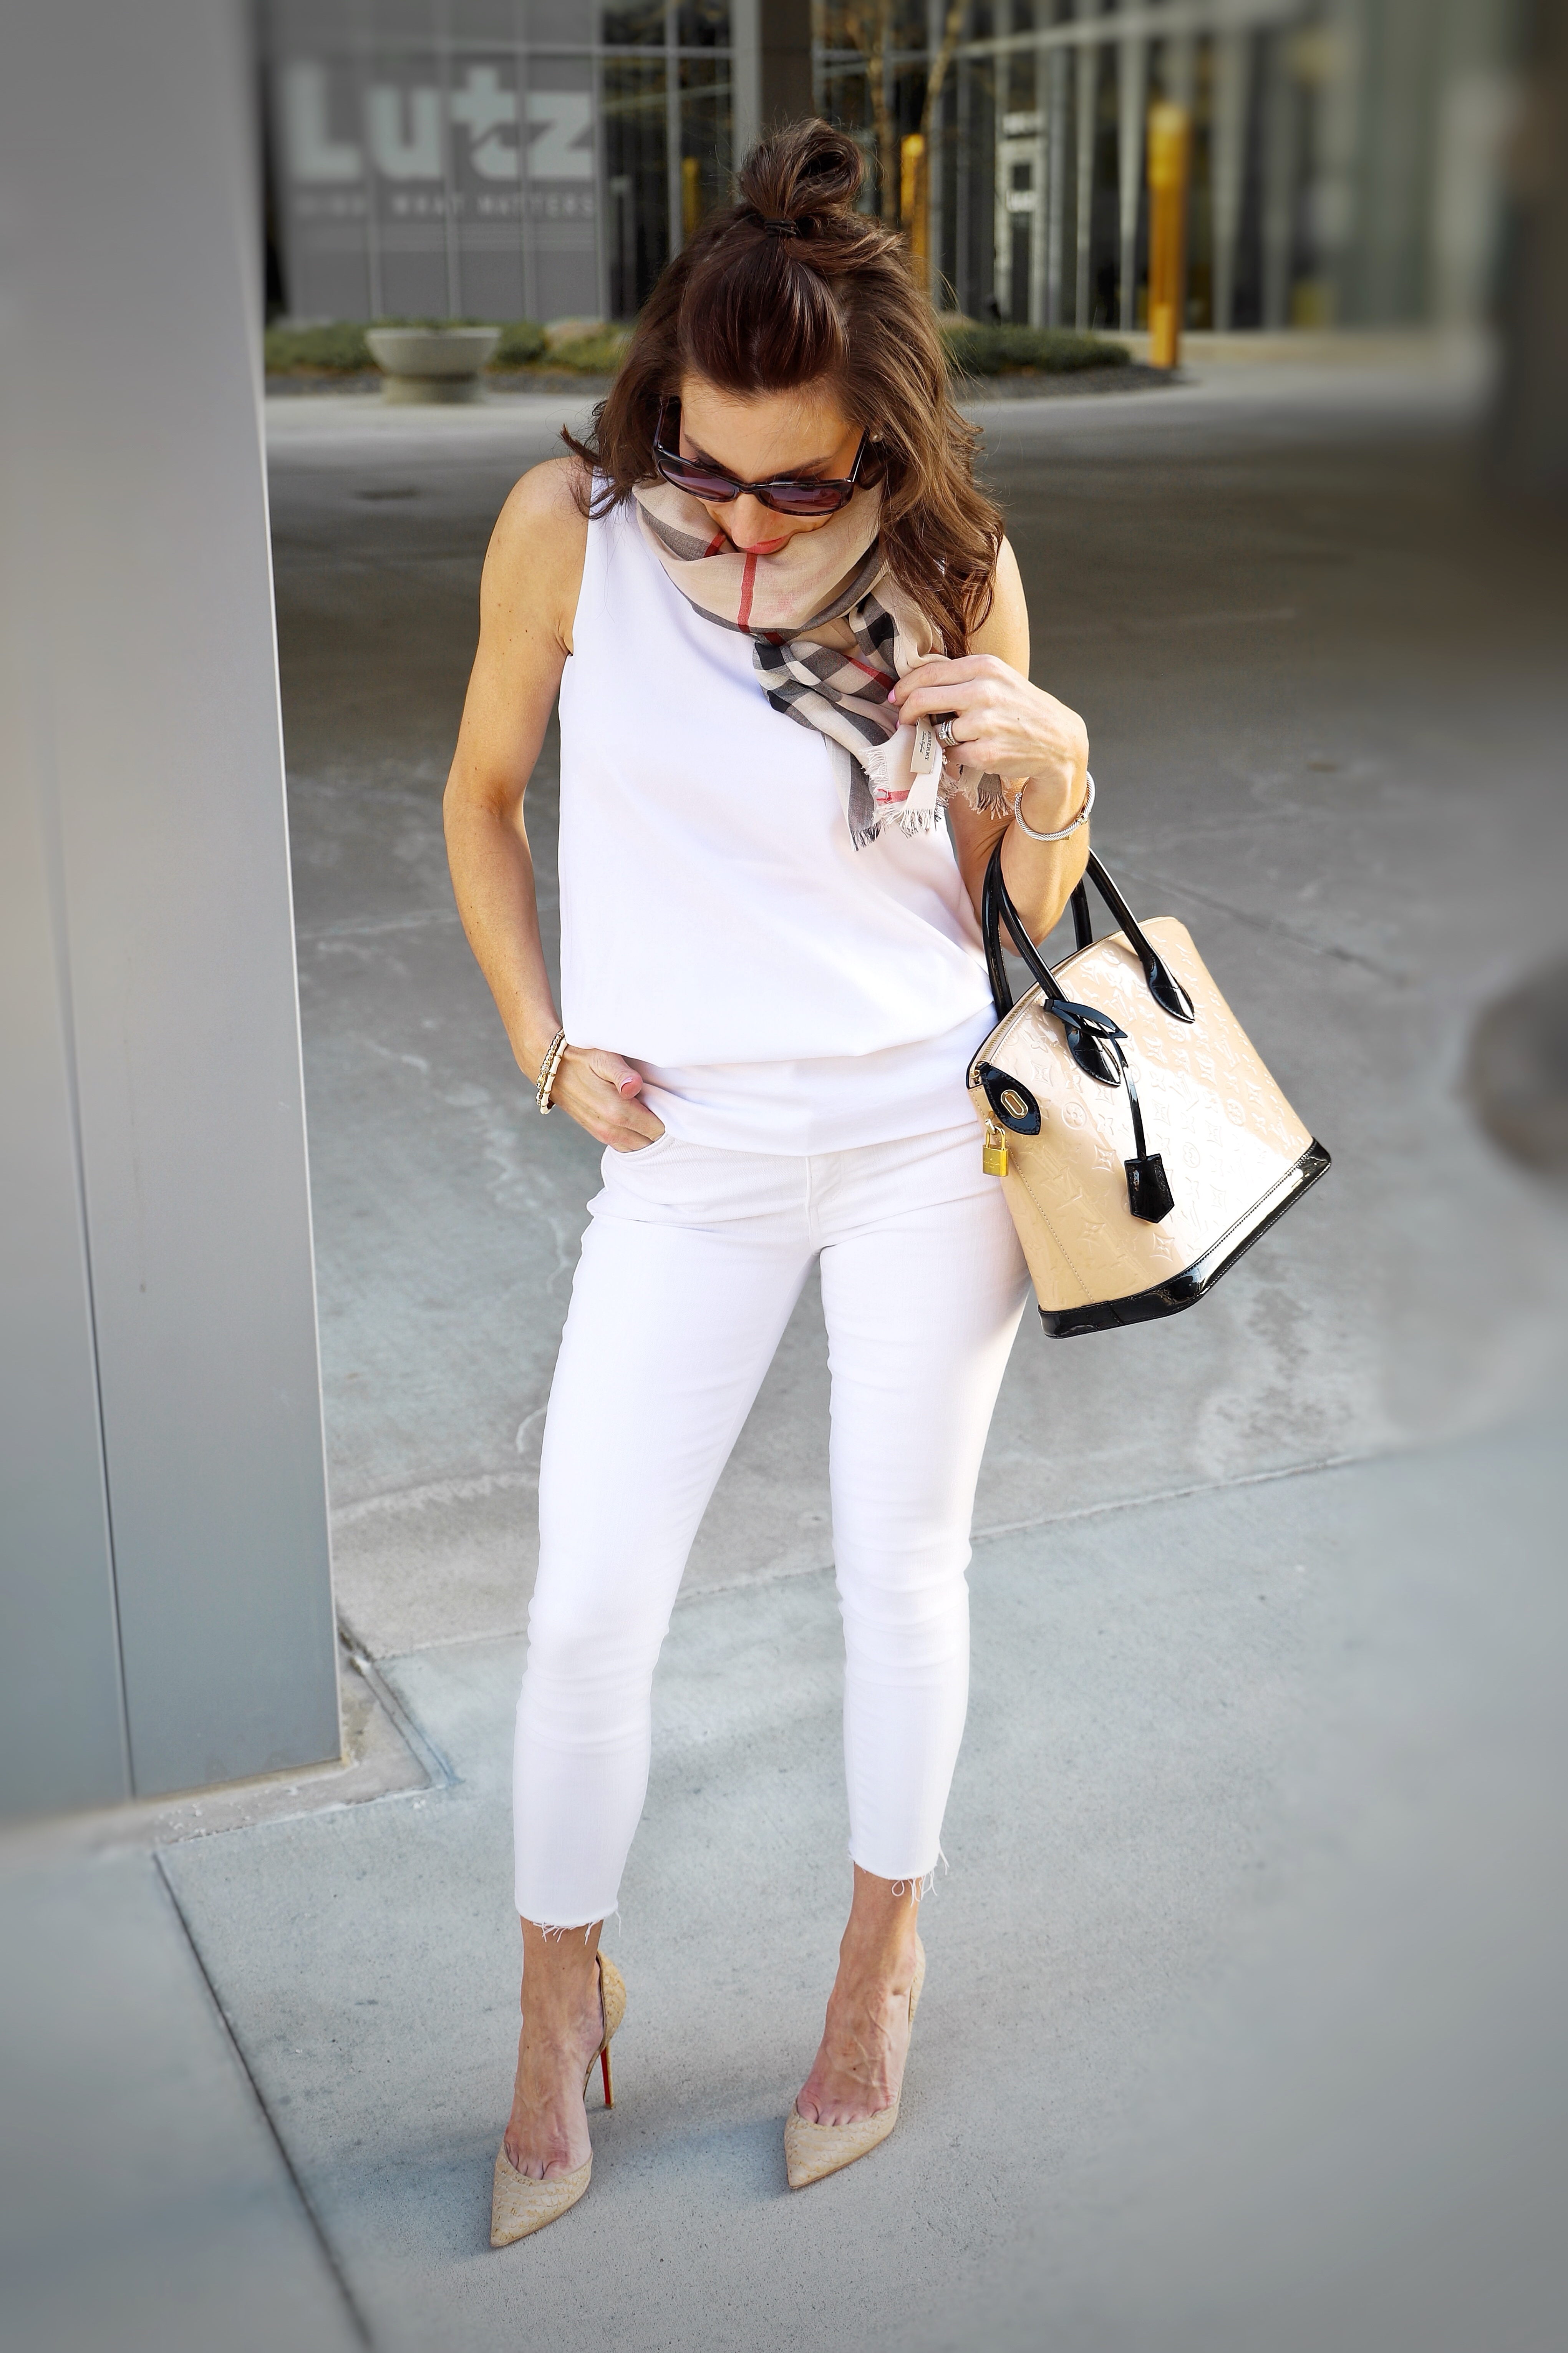 All White Summer Outfit // Summer Fashion // www.tinystampede.com